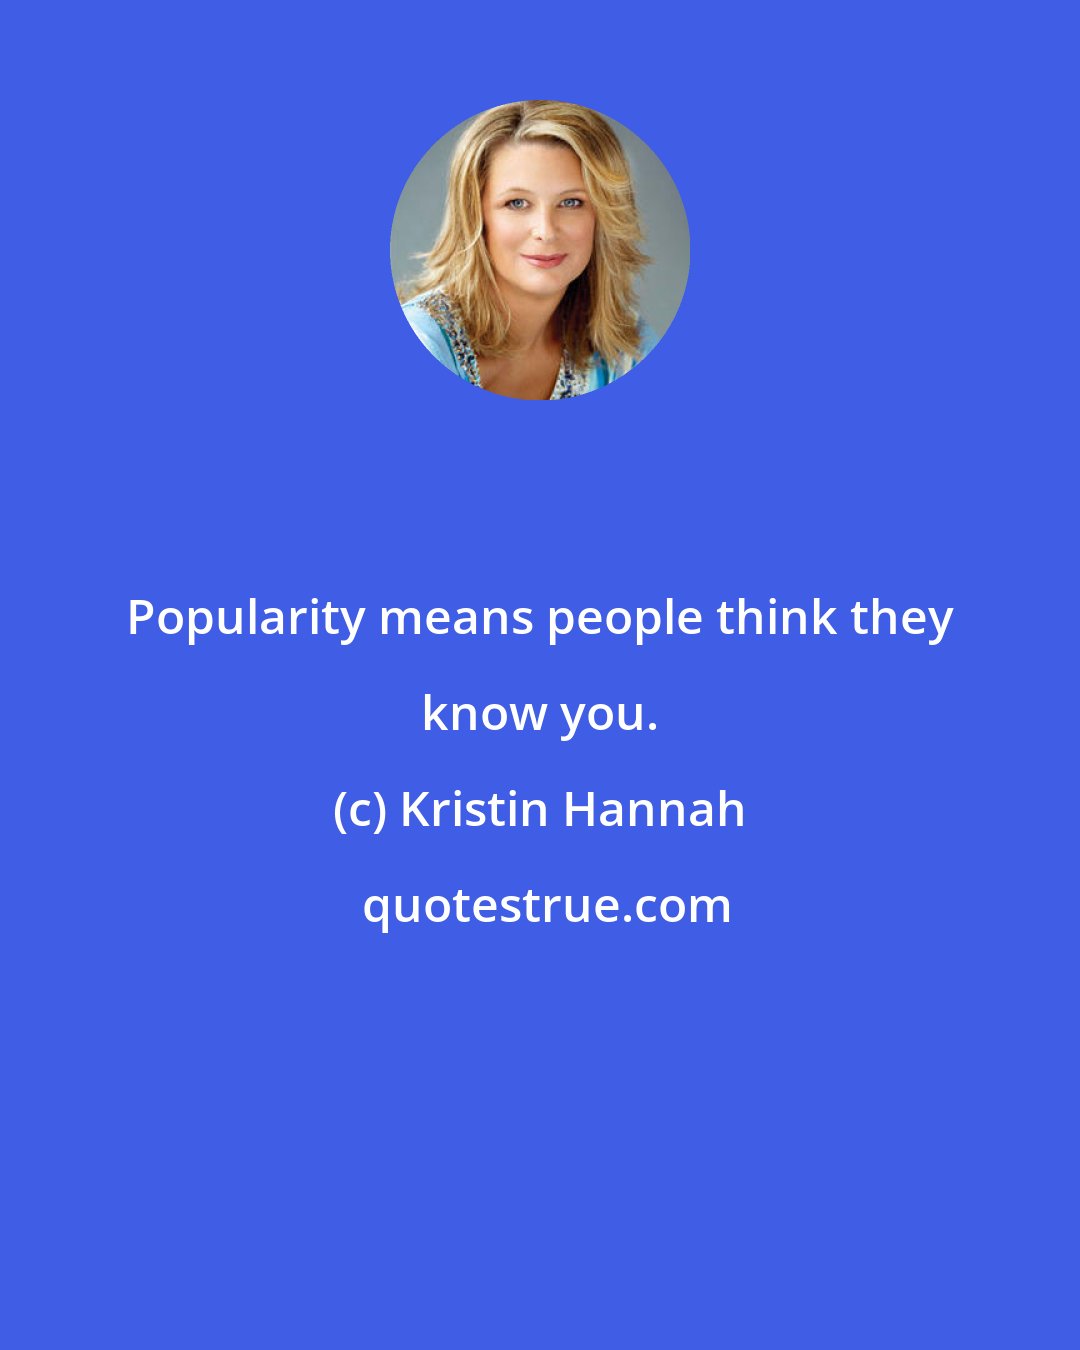 Kristin Hannah: Popularity means people think they know you.